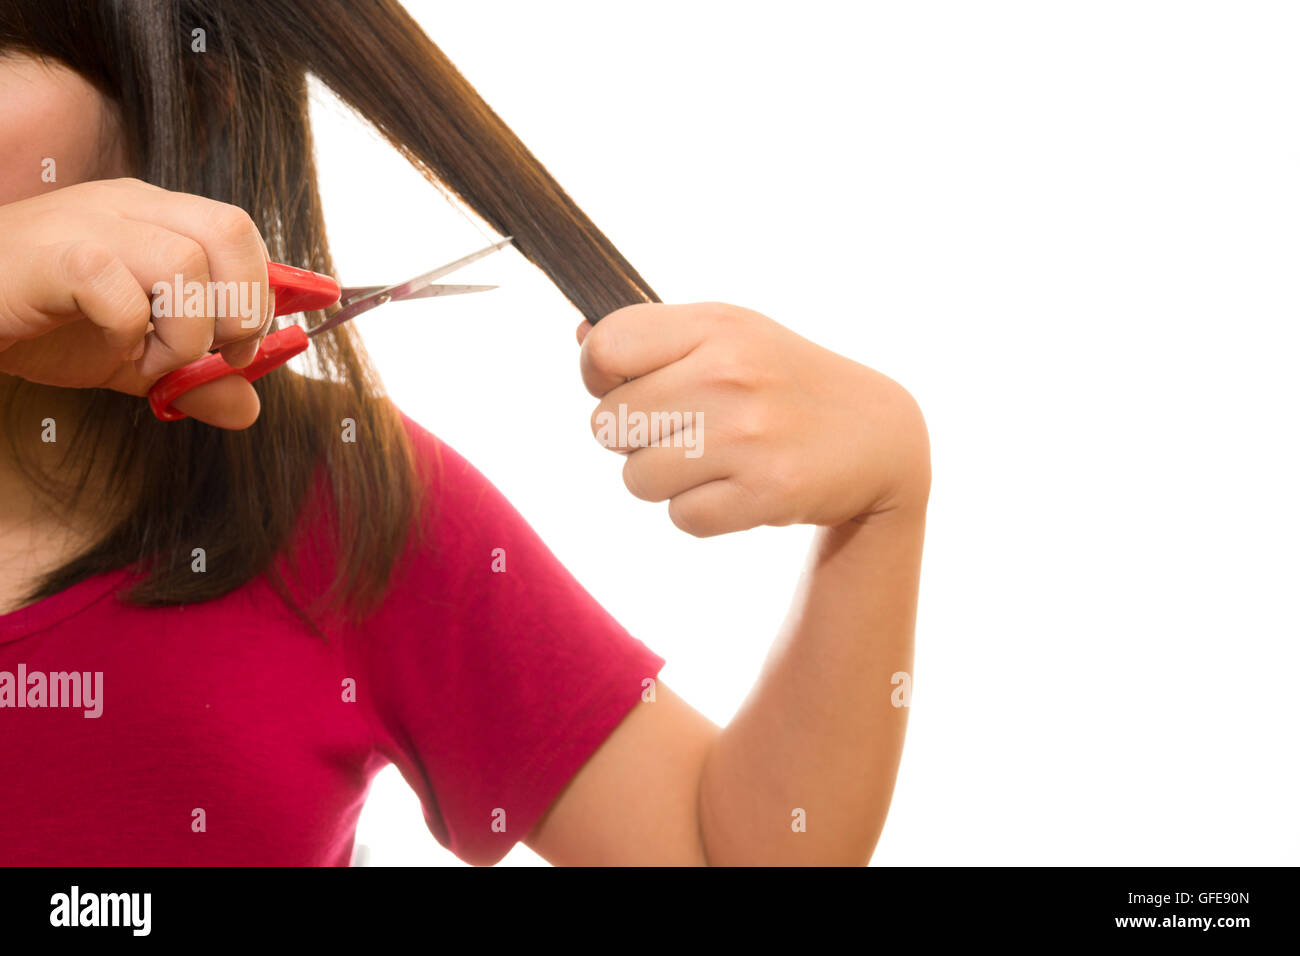 woman cutting her hair with scissors - unhappy expression, isolated on white background Stock Photo